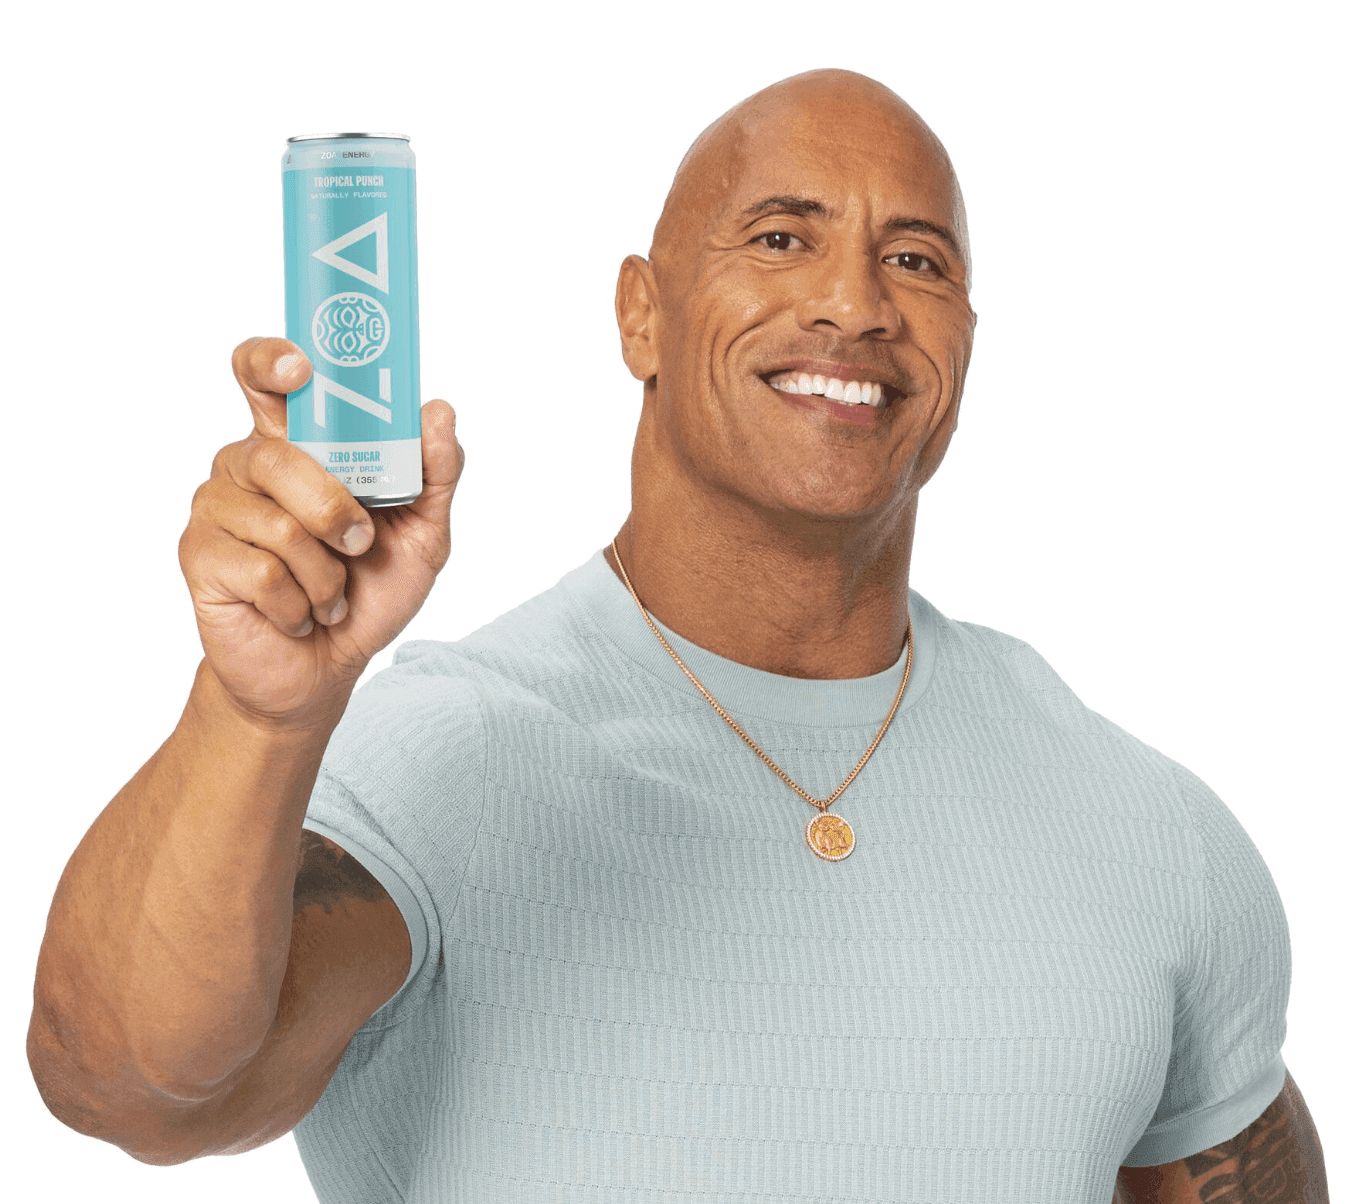 Dwayne "The Rock" Johnson holding a energy drink called Zoa